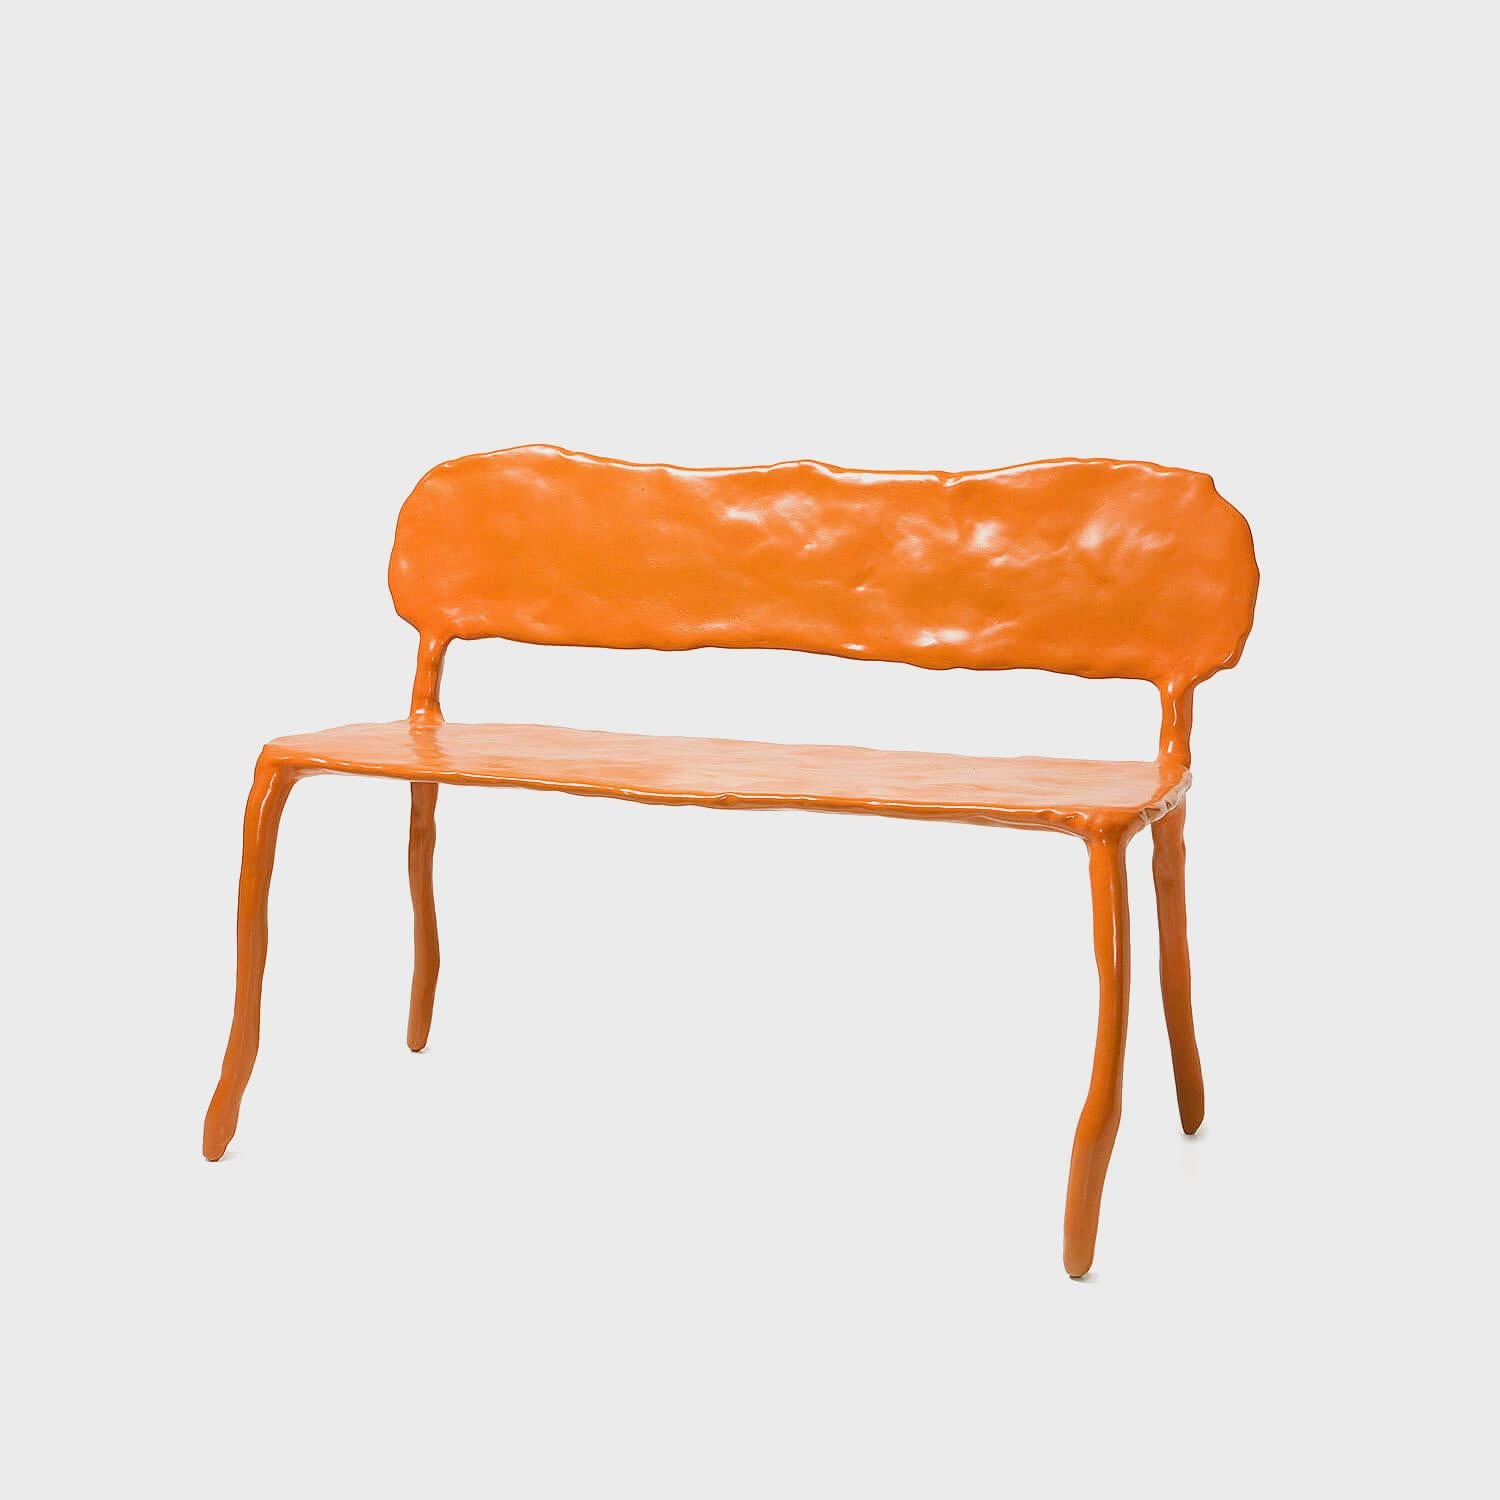 Metal Contemporary Clay Bench by Maarten Baas For Sale